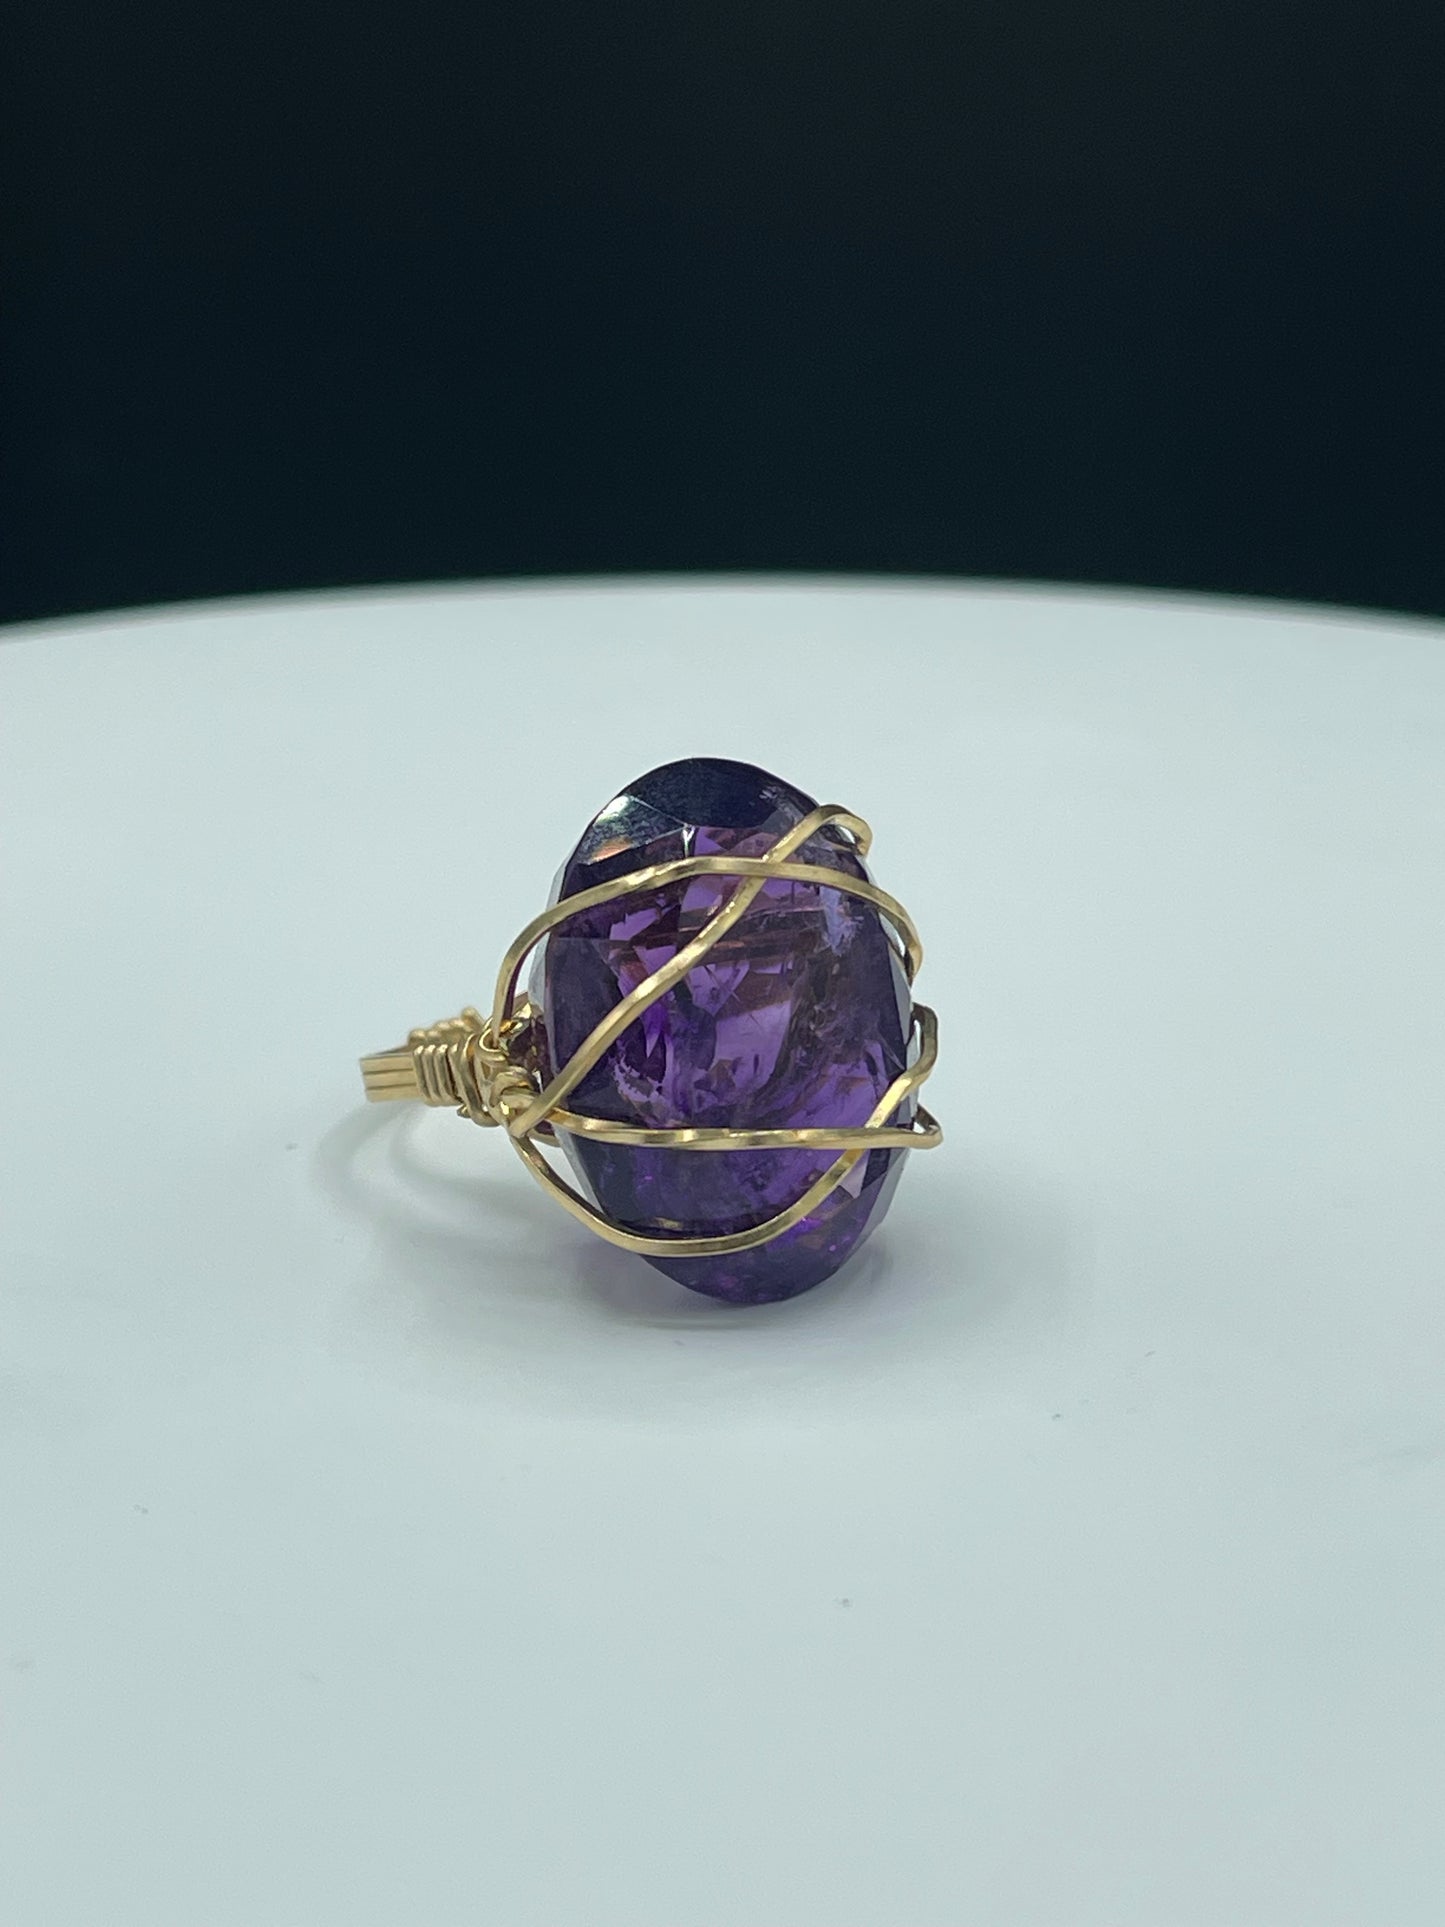 33.31 Carat Natural Zambian Amethyst 14k Gold Filled Wire Wrapped Ring (Size 7)